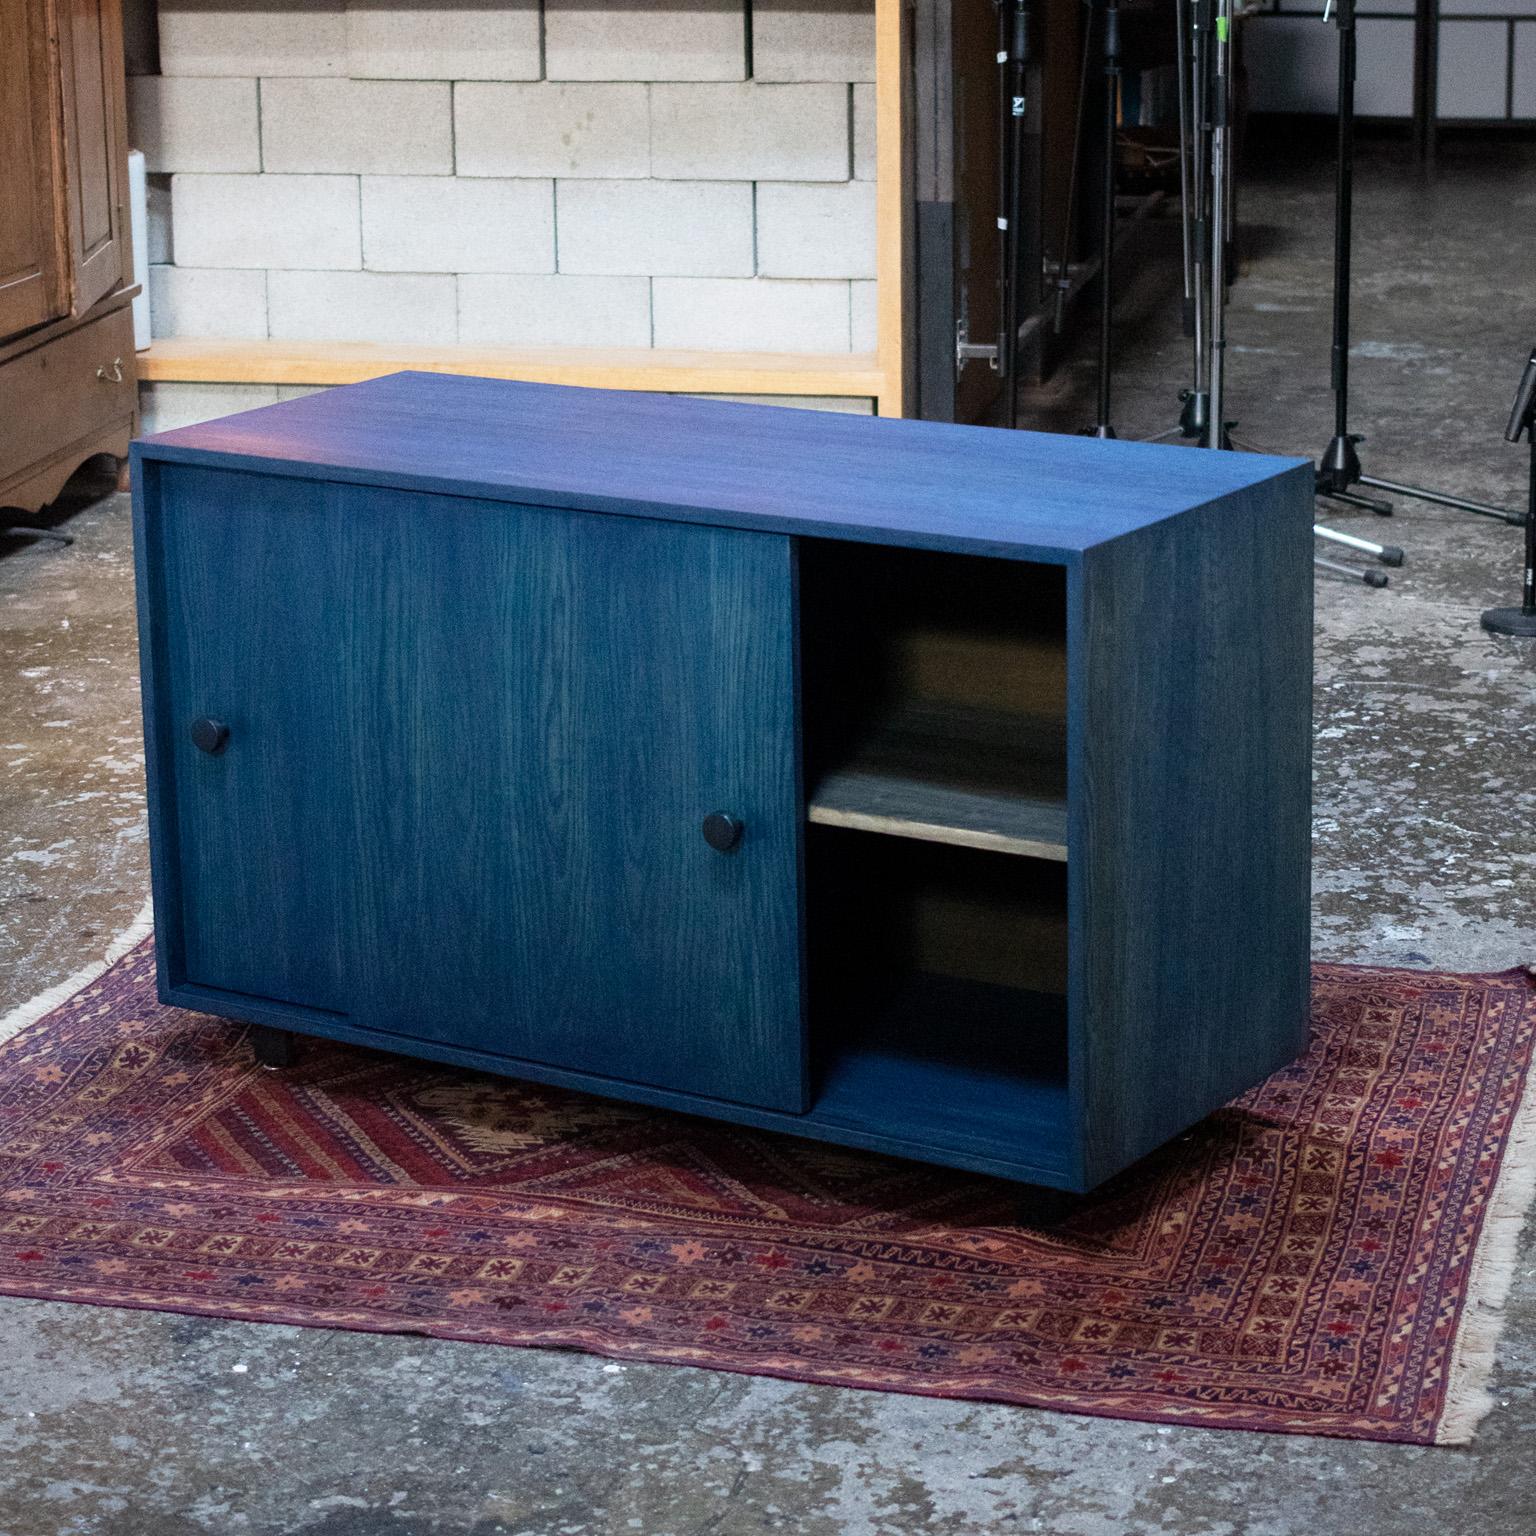 The Aquinas cabinet is a compact, sliding door cabinet perfect for records, books, and smaller items. Intended for light storage this cabinet is minimalist in design featuring Swedish hardware. Crafted from oak this cabinet is lightweight, sleek,